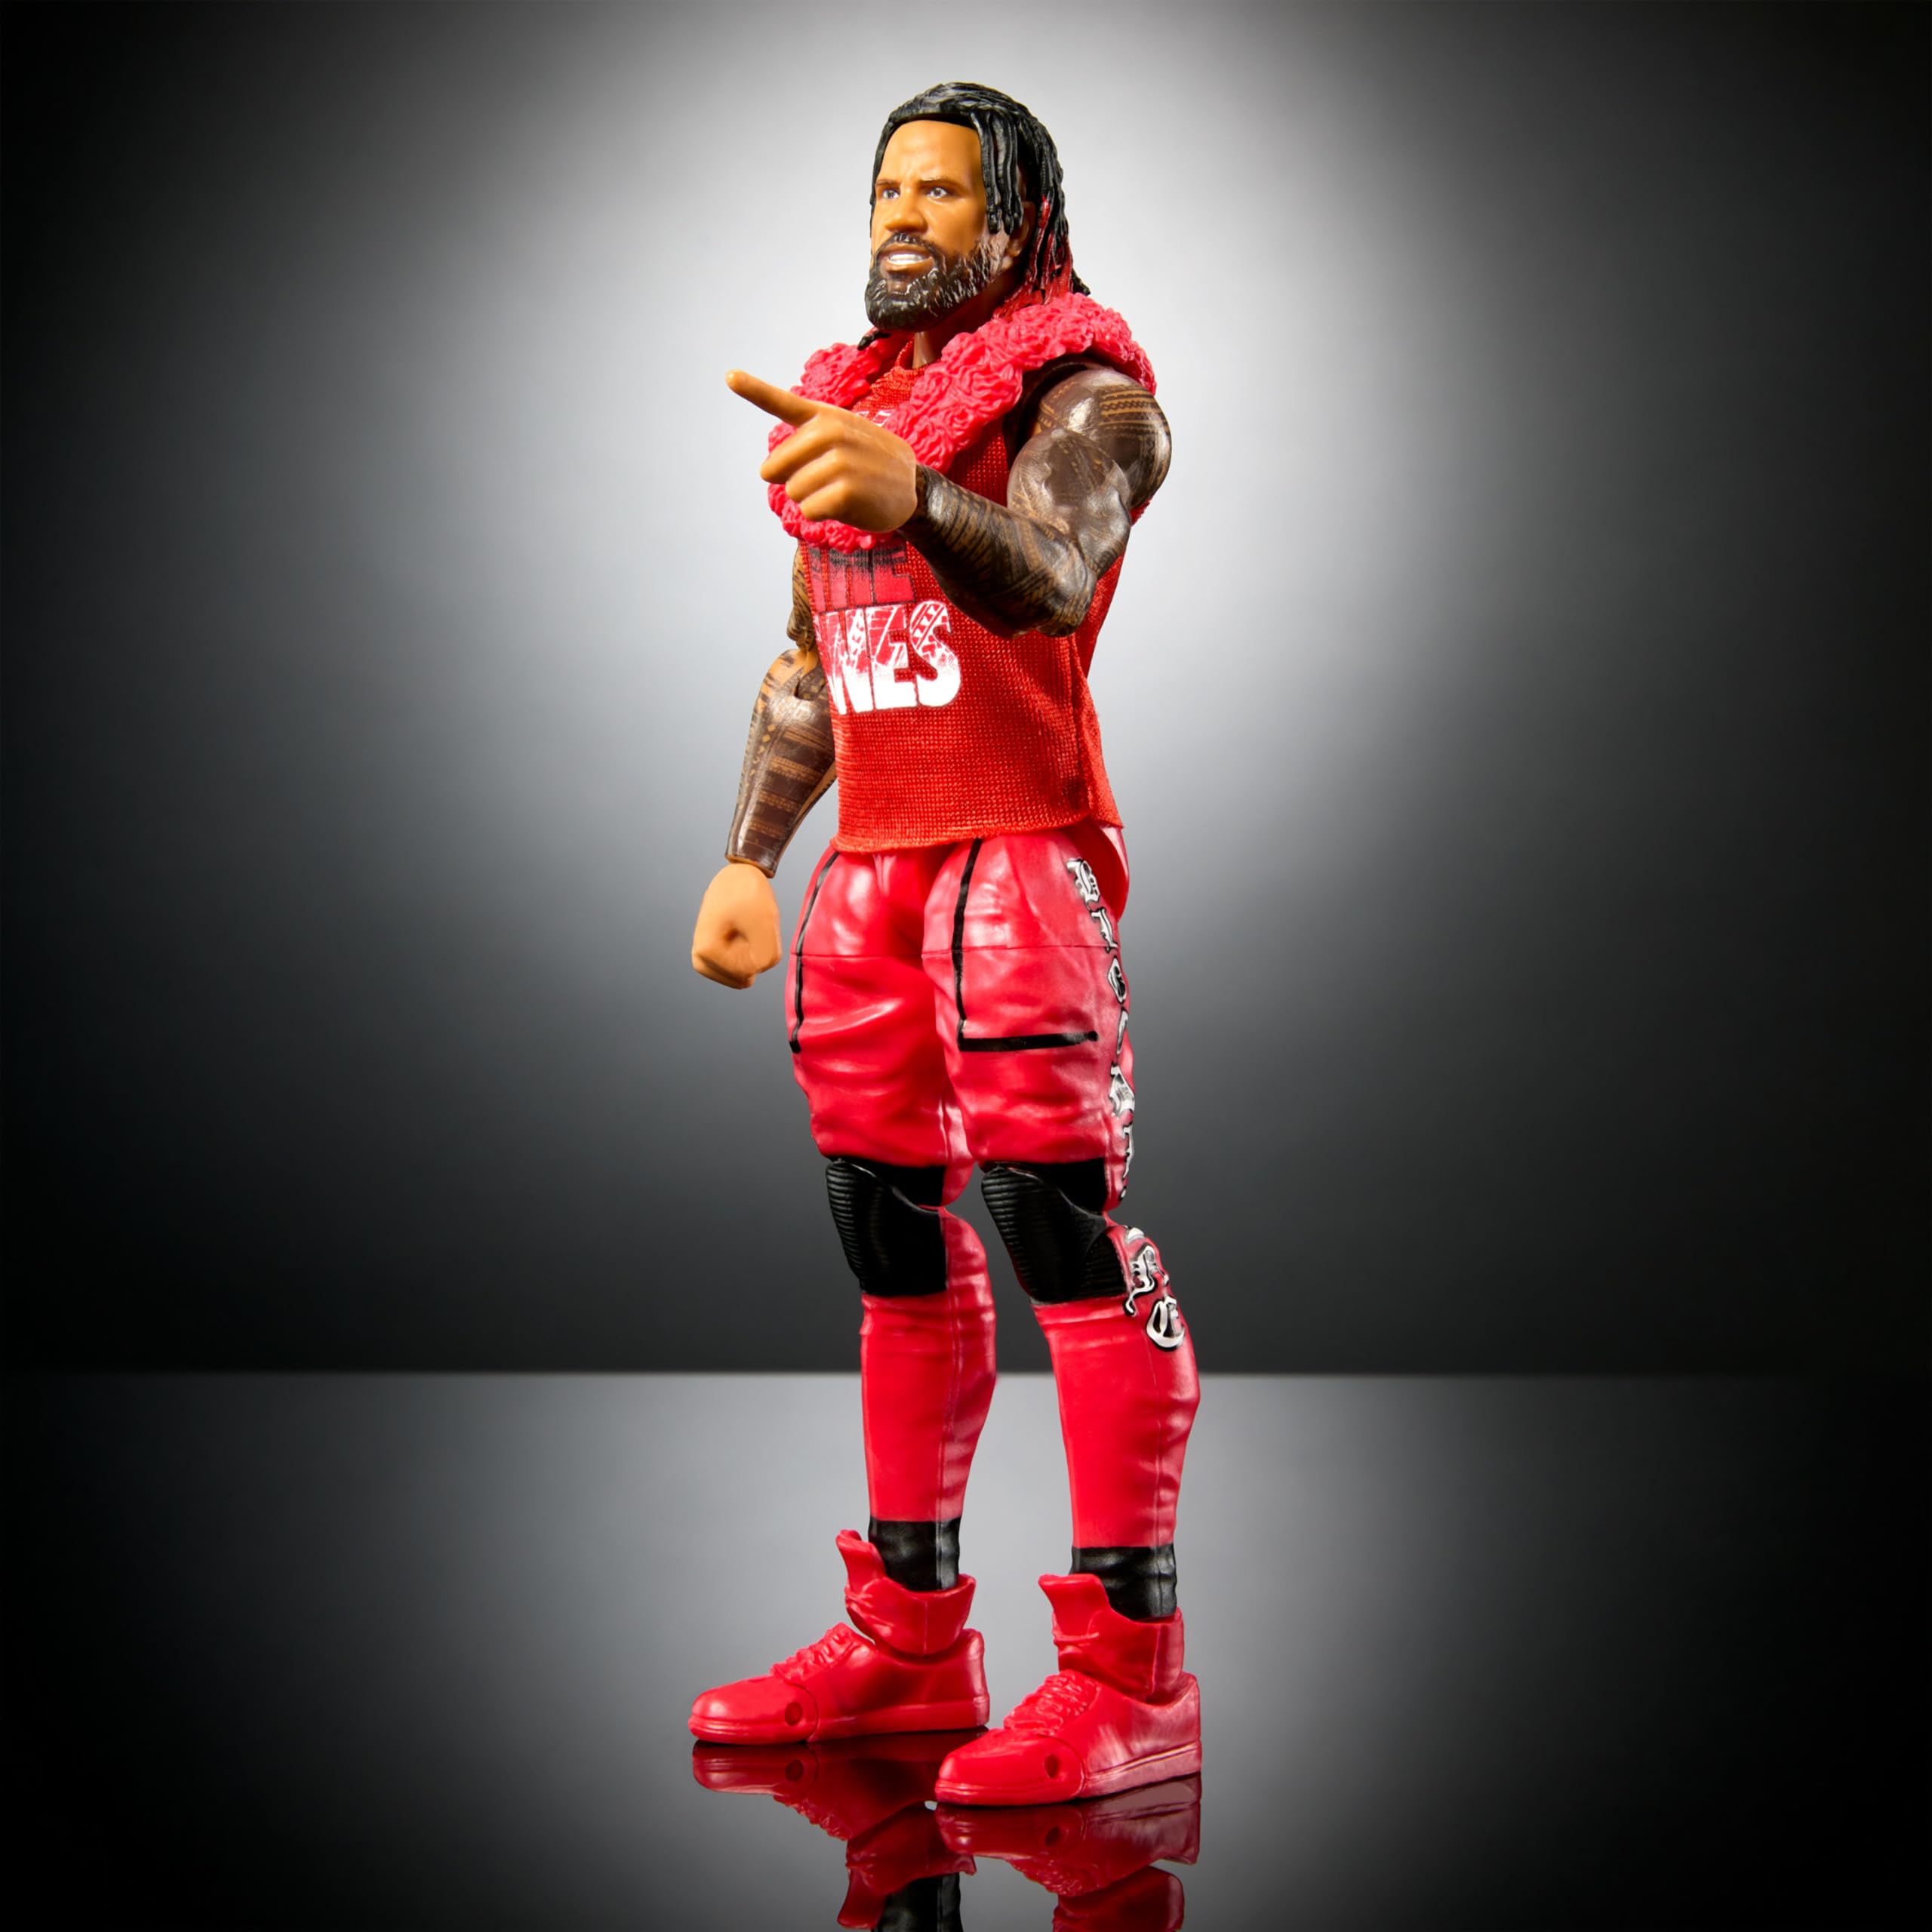 WWE Elite Action Figure & Accessories, 6-inch Collectible Jimmy USO with Articulation, Life-Like Look & Swappable Hands​